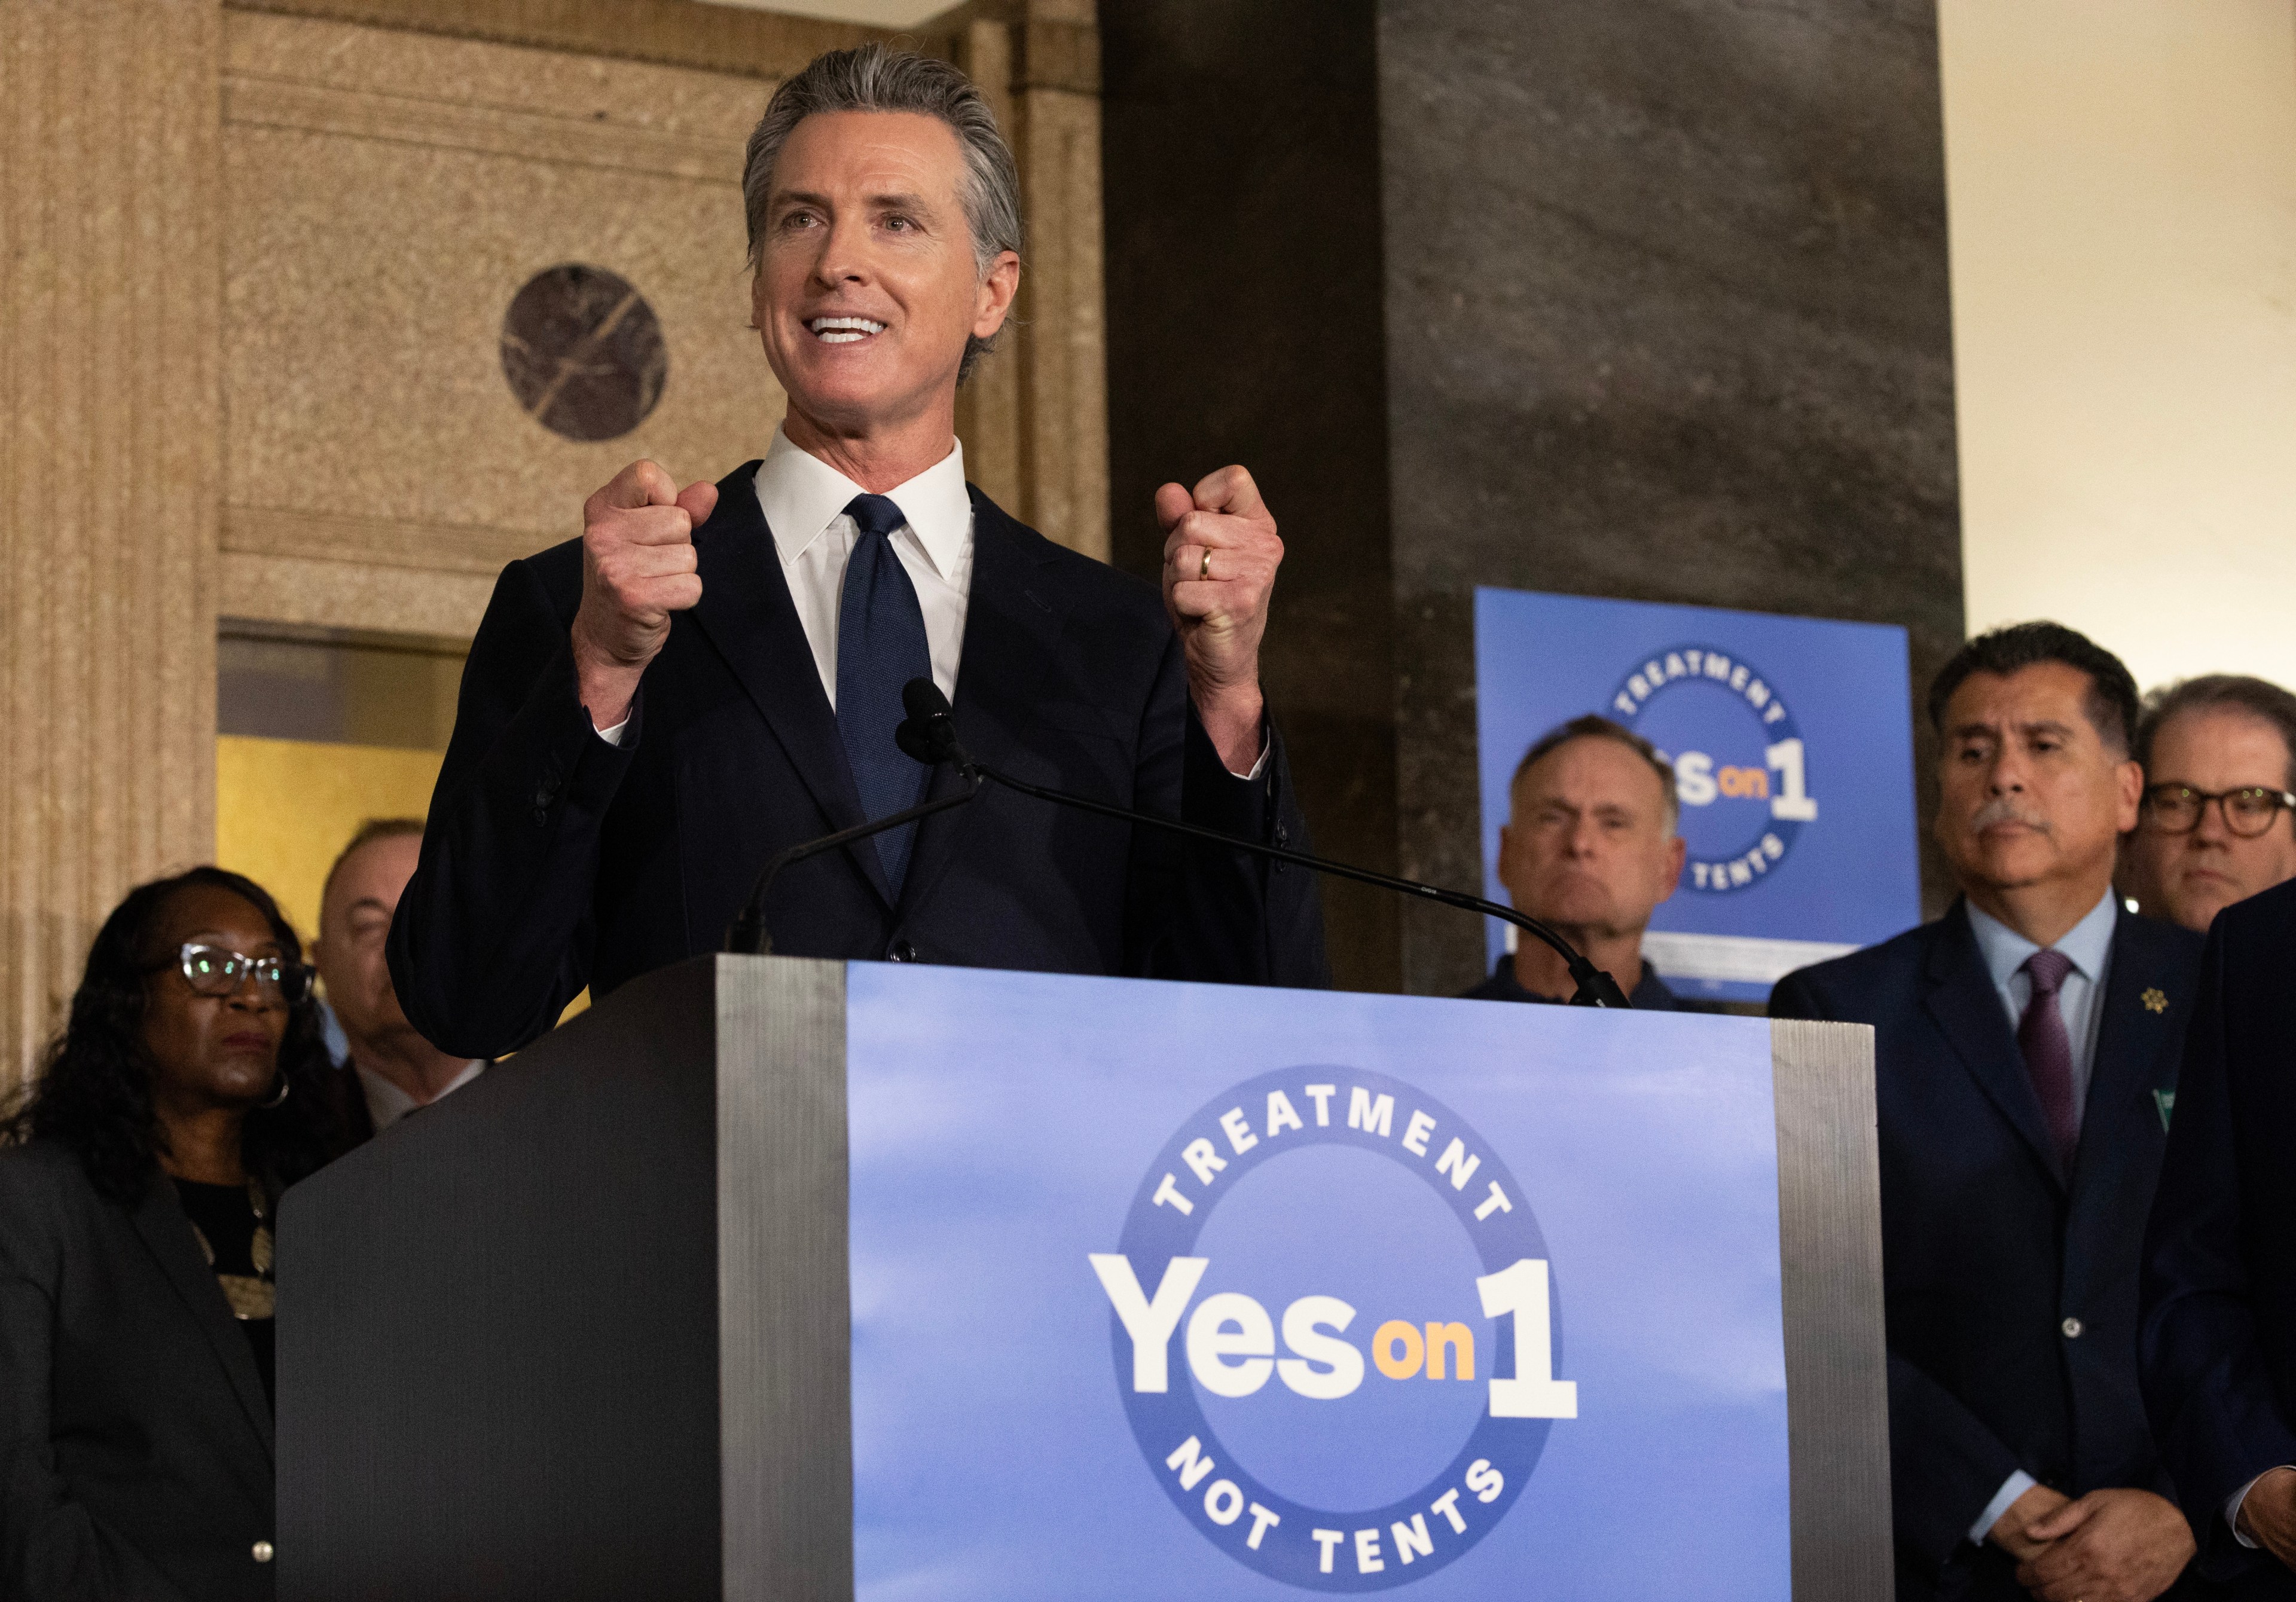 A man at a podium gestures passionately, with a "Yes on 1" sign, and attentive people around him.